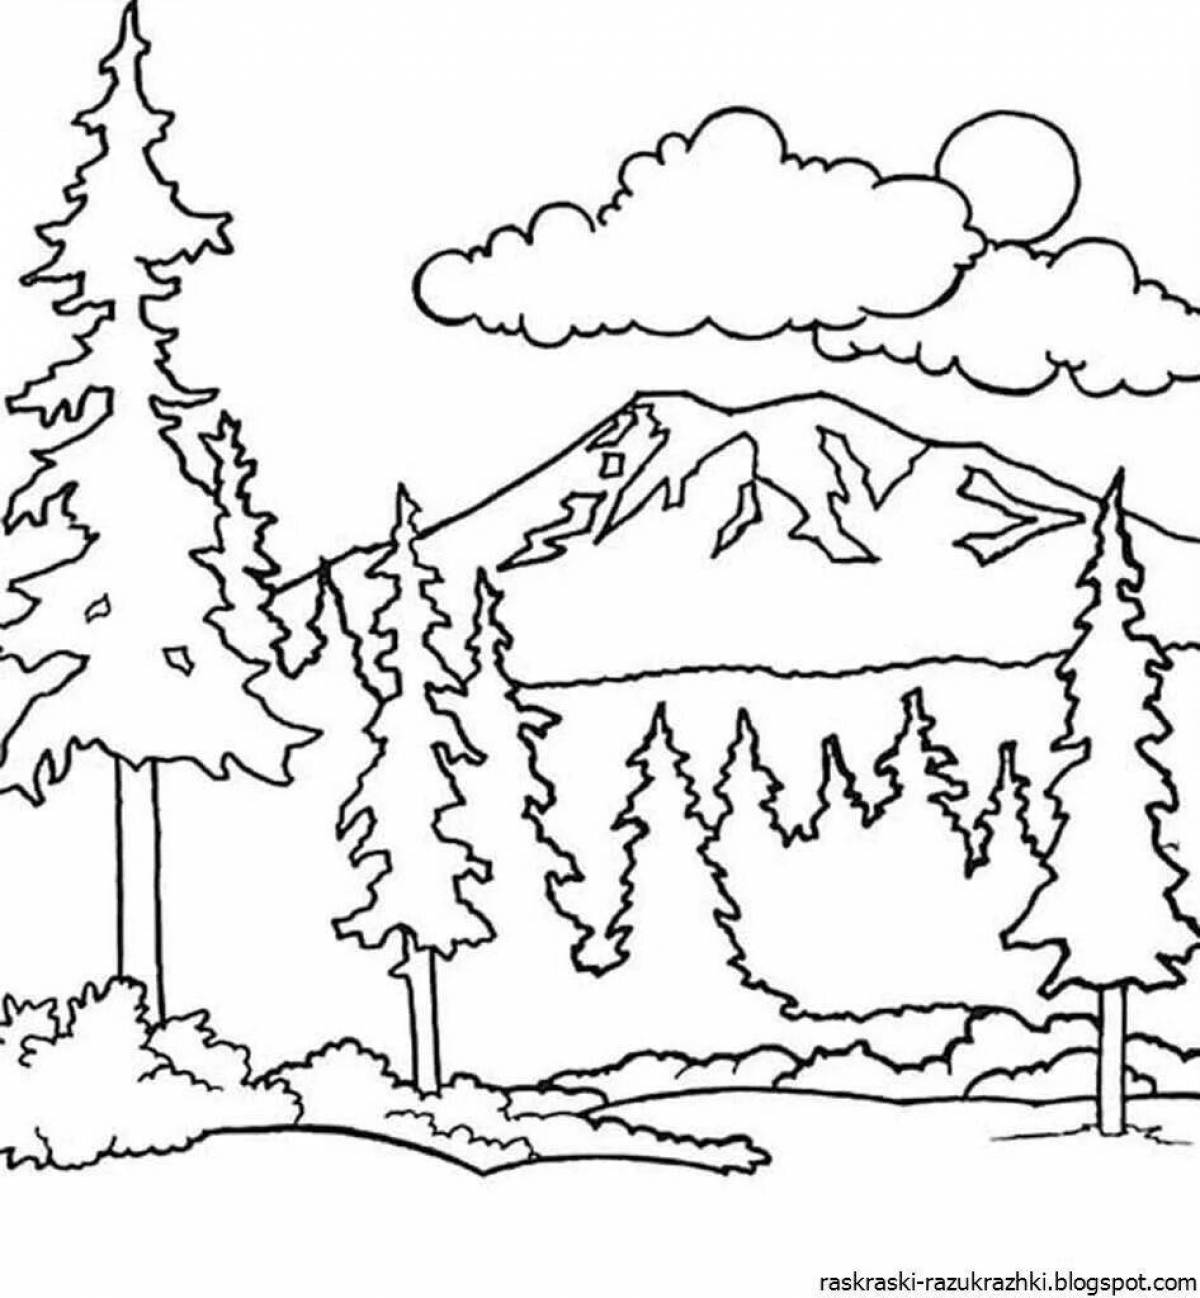 Delightful taiga coloring book for kids